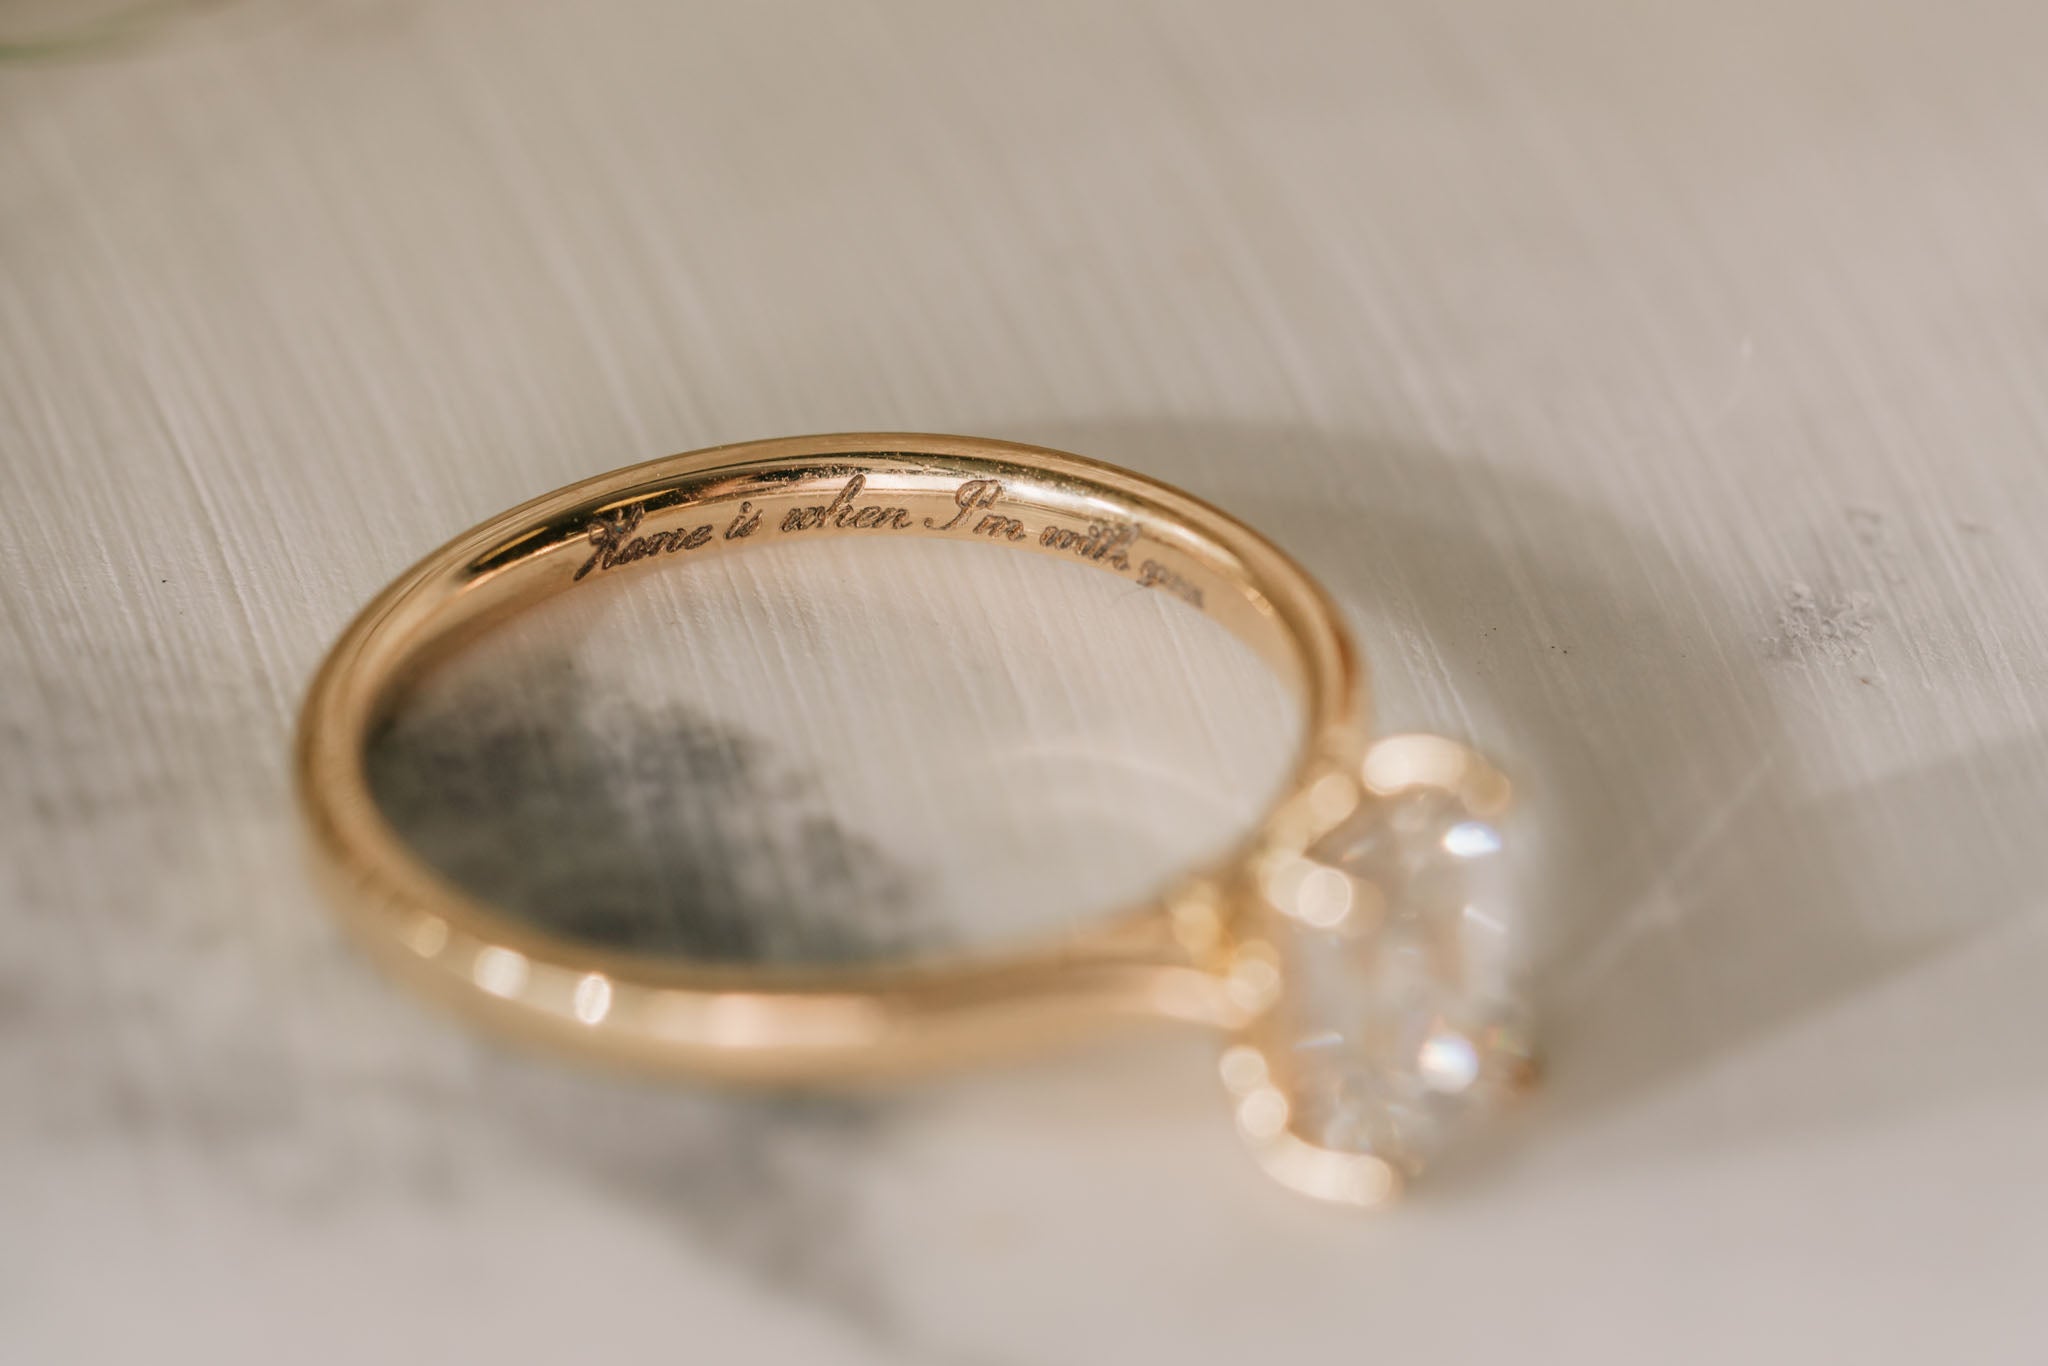 Close up image of gold ring with 'Home is where i'm with you' engraved in script font on the inside of the band.